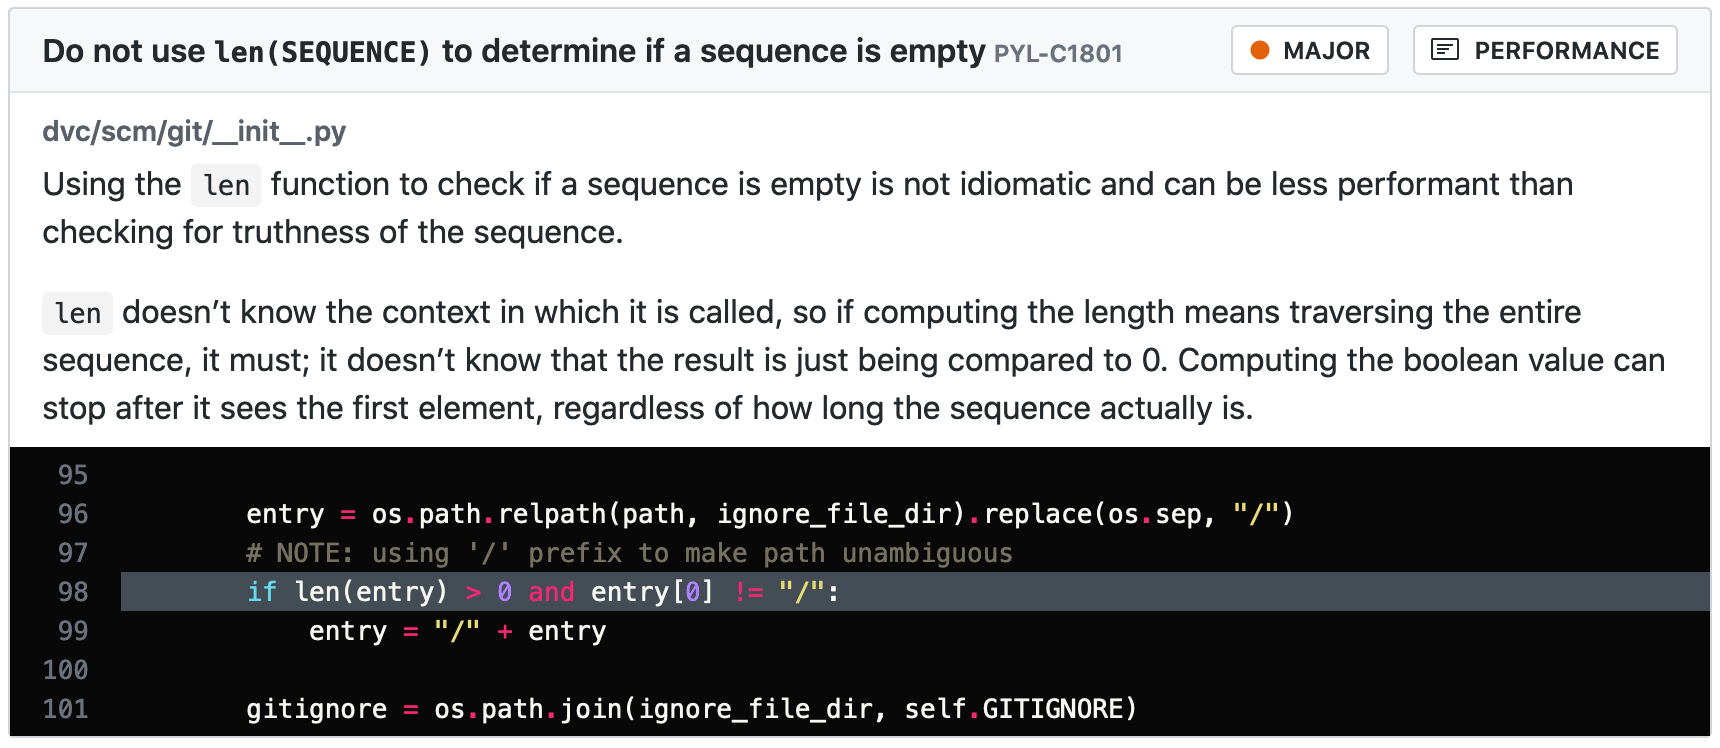 Don't use len(SEQUENCE) to determine if a sequence is empty